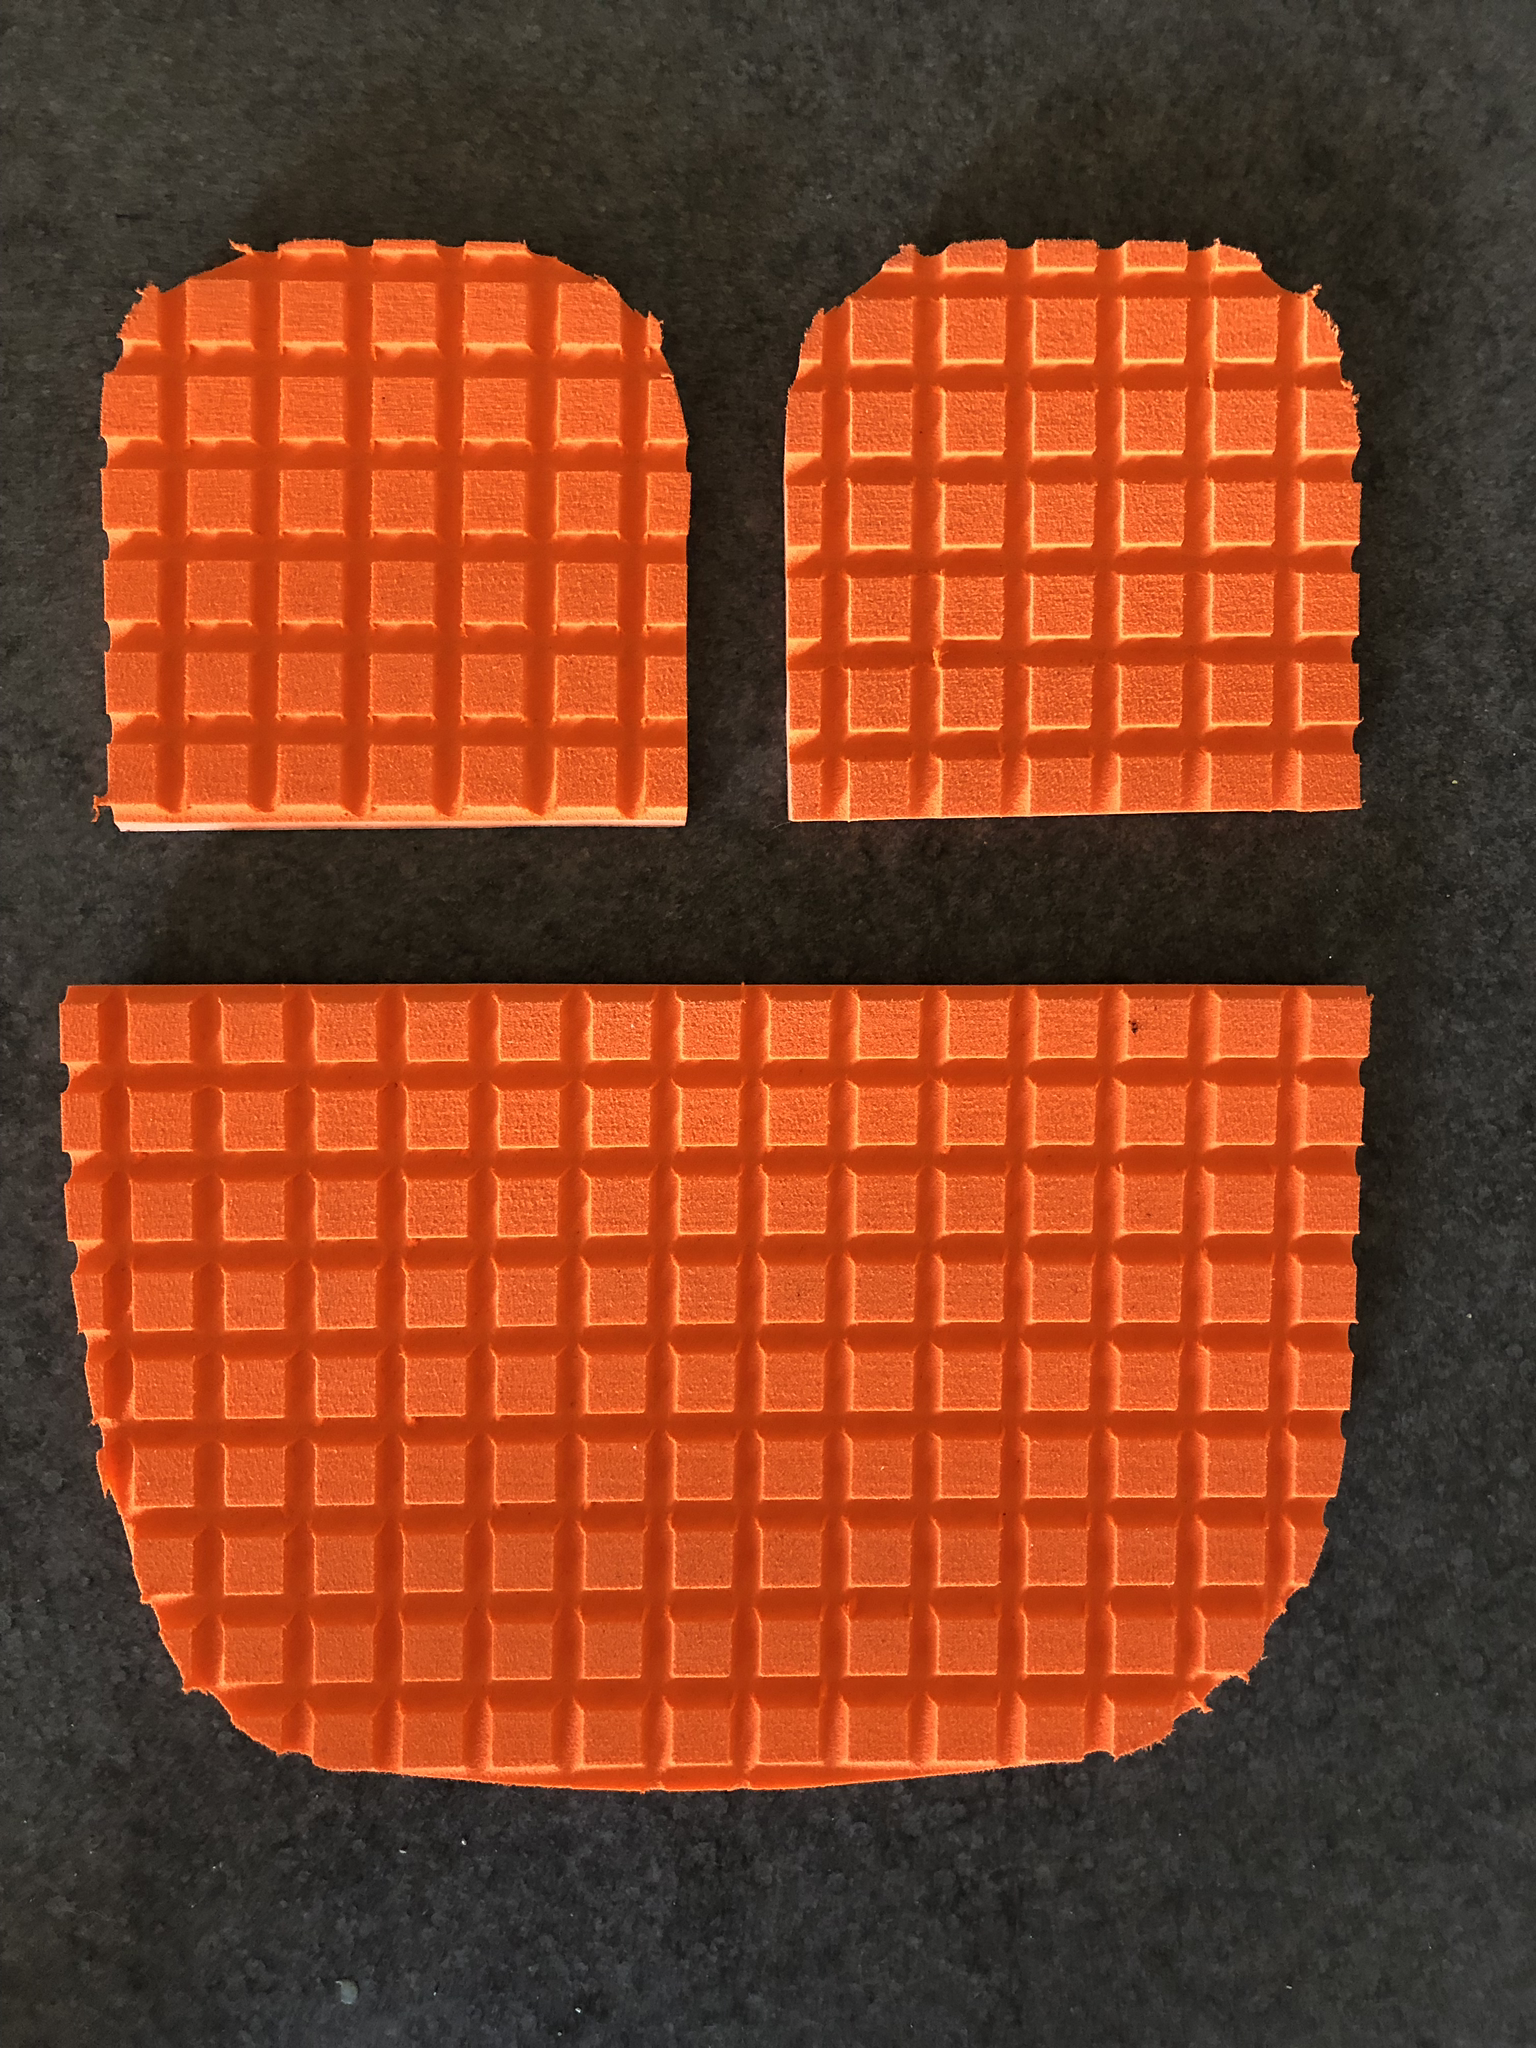 Non skid foot pads